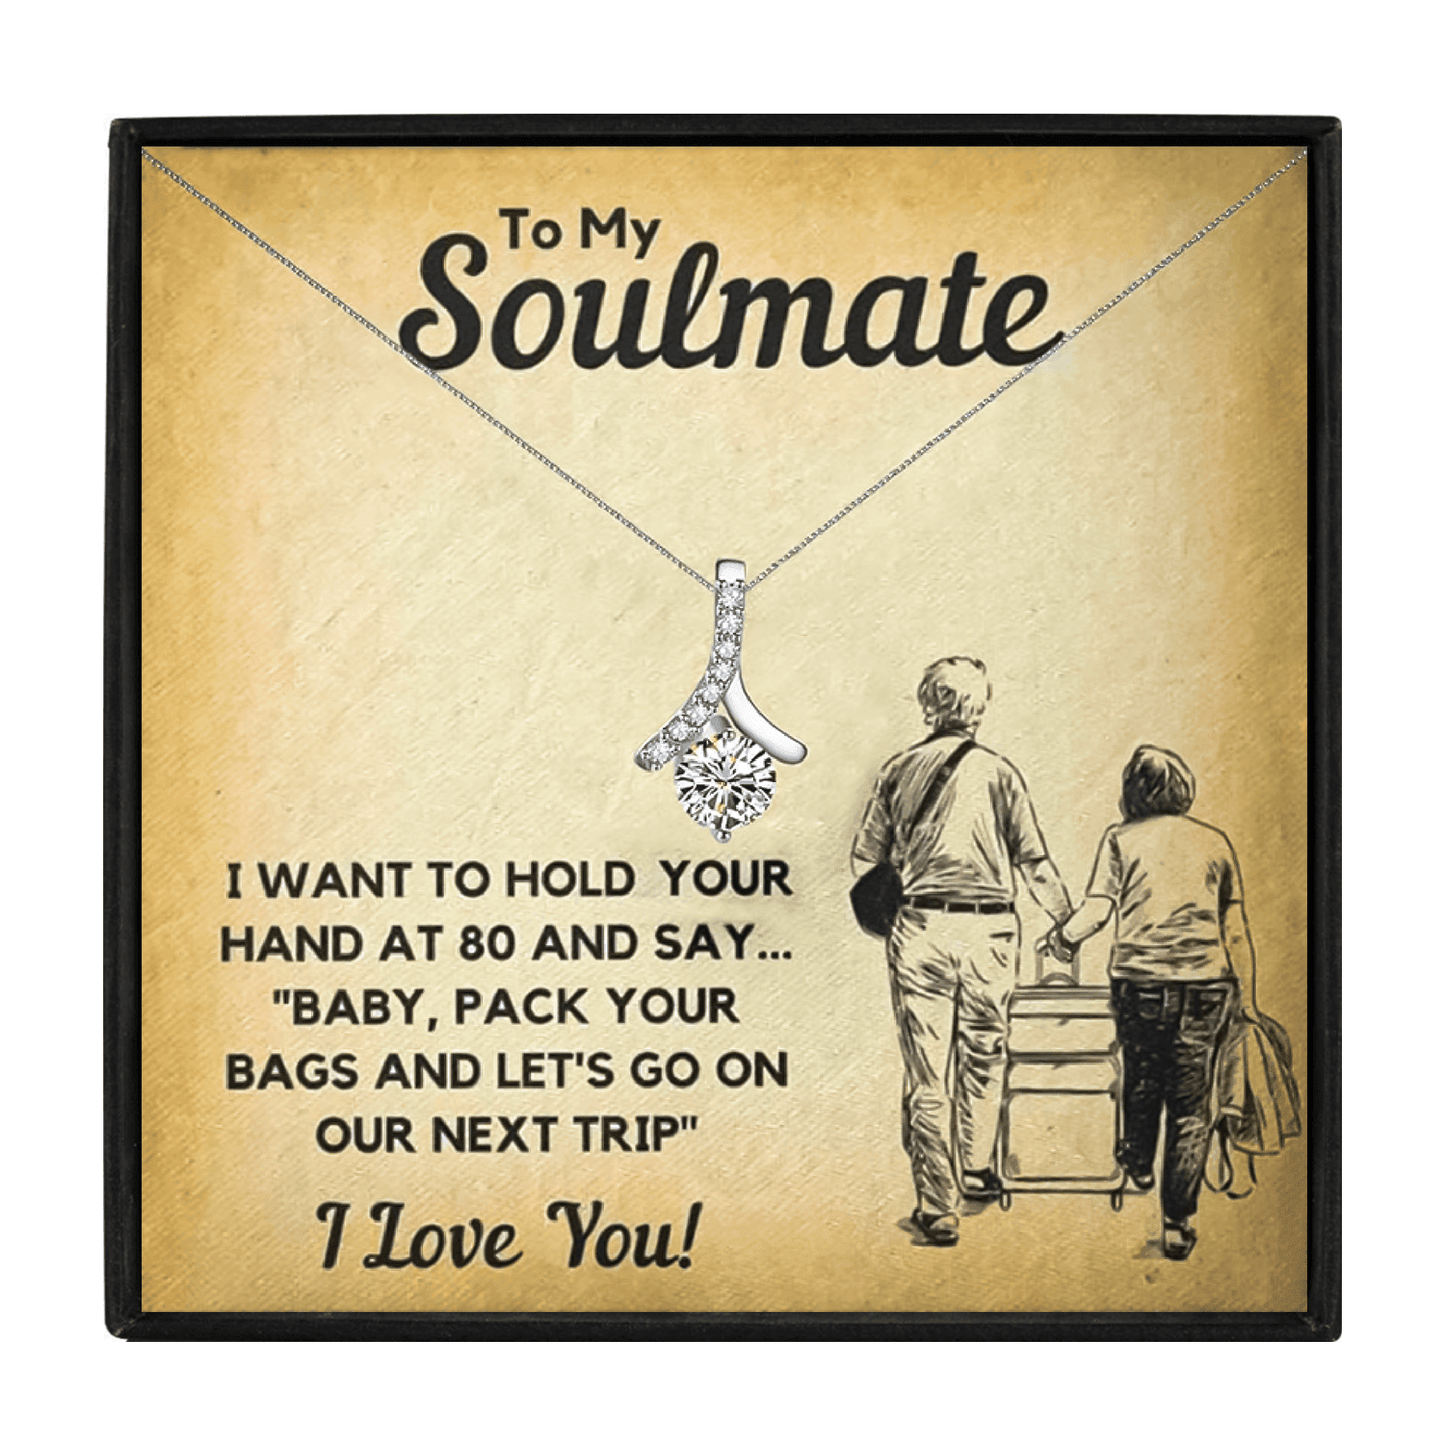 Soulmate Necklace For Her for Christmas 2023 | Soulmate Necklace For Her - undefined | my soulmate necklace, soulmate necklace, soulmate pendant, to my beautiful soulmate necklace, to my soulmate necklace | From Hunny Life | hunnylife.com